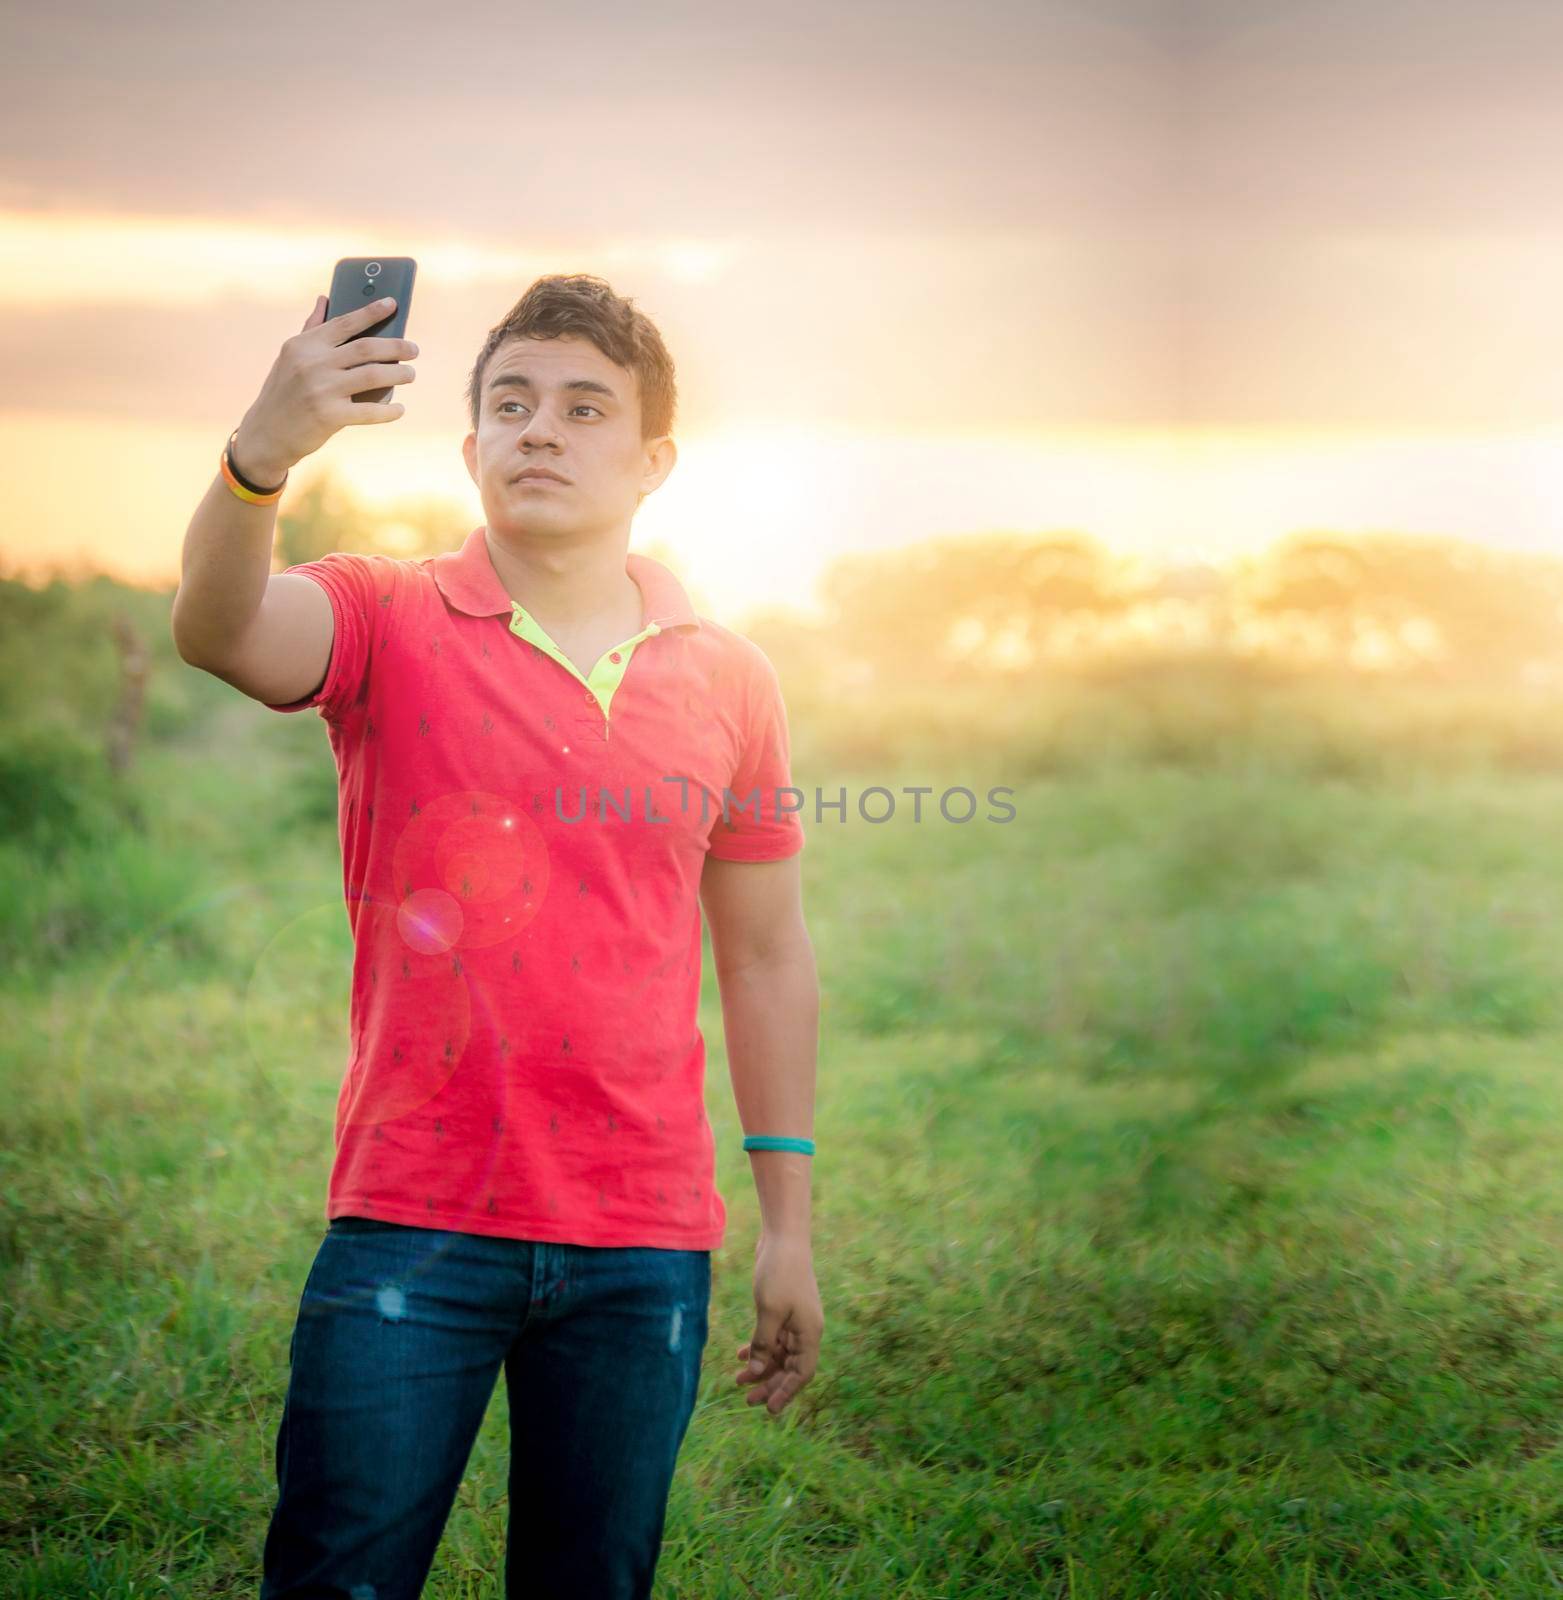 Young man taking a picture, young man taking selfie in the field, young man in the field taking a picture by isaiphoto